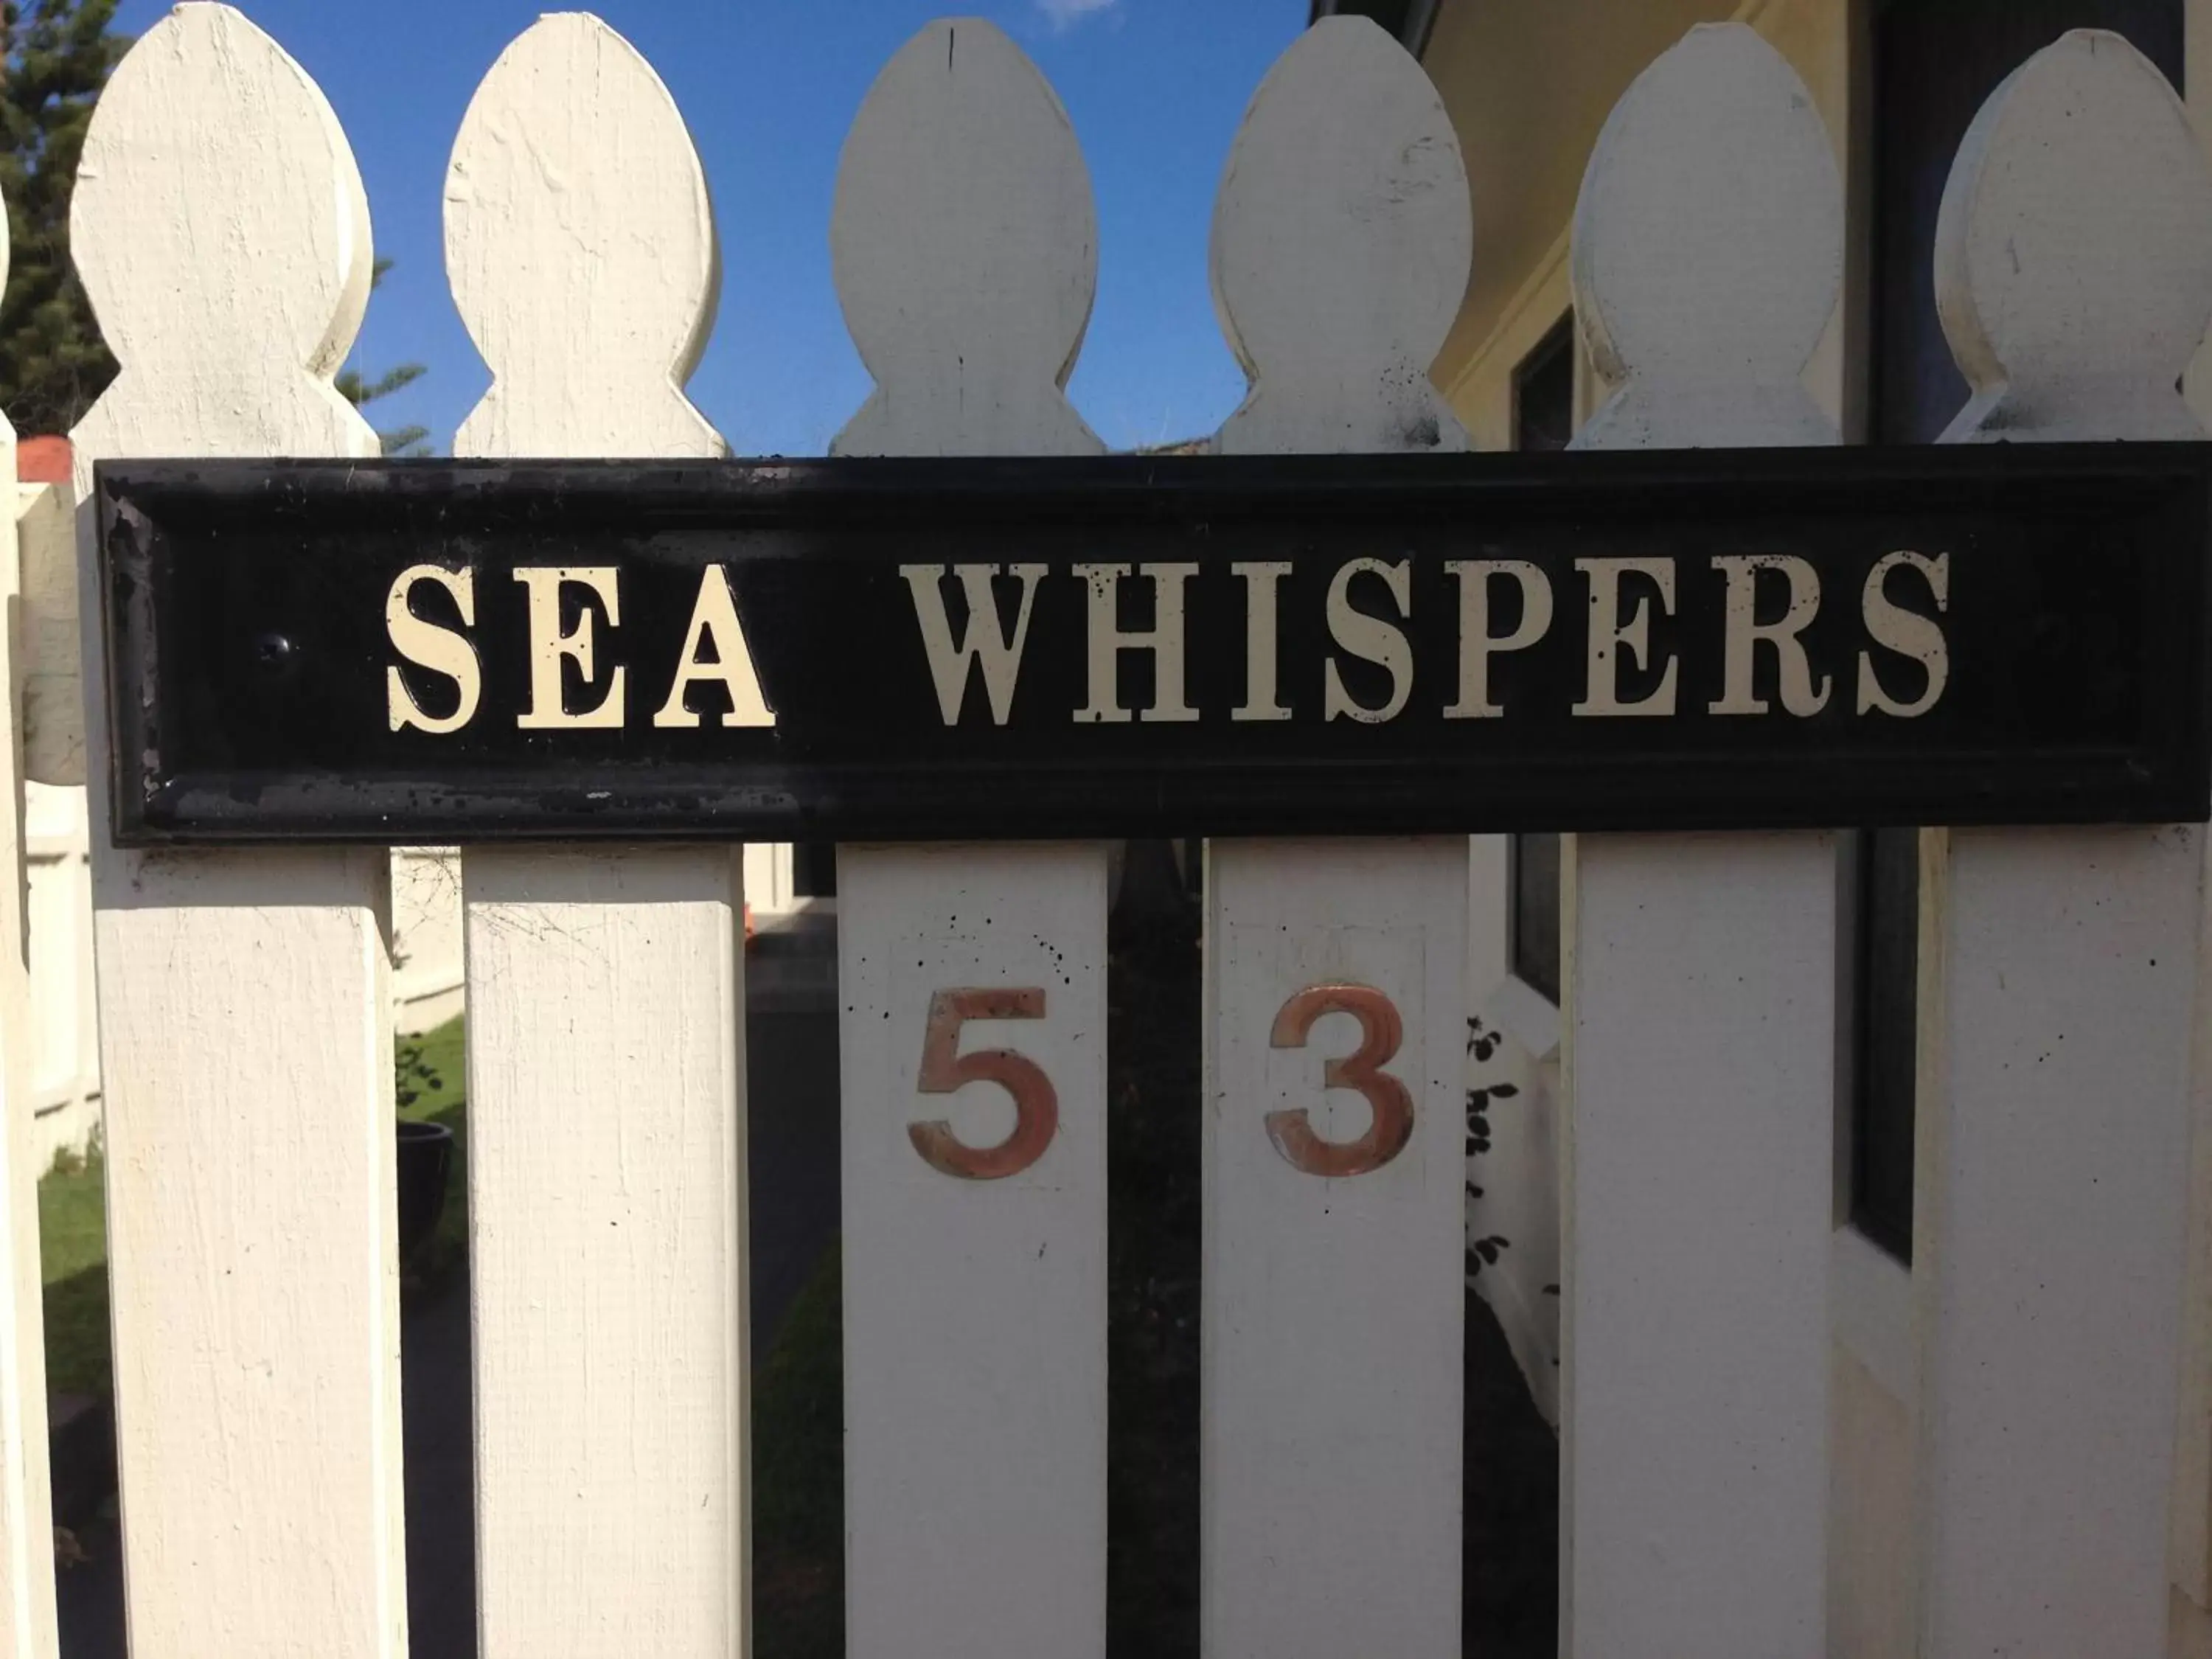 Property logo or sign in Sea Whispers